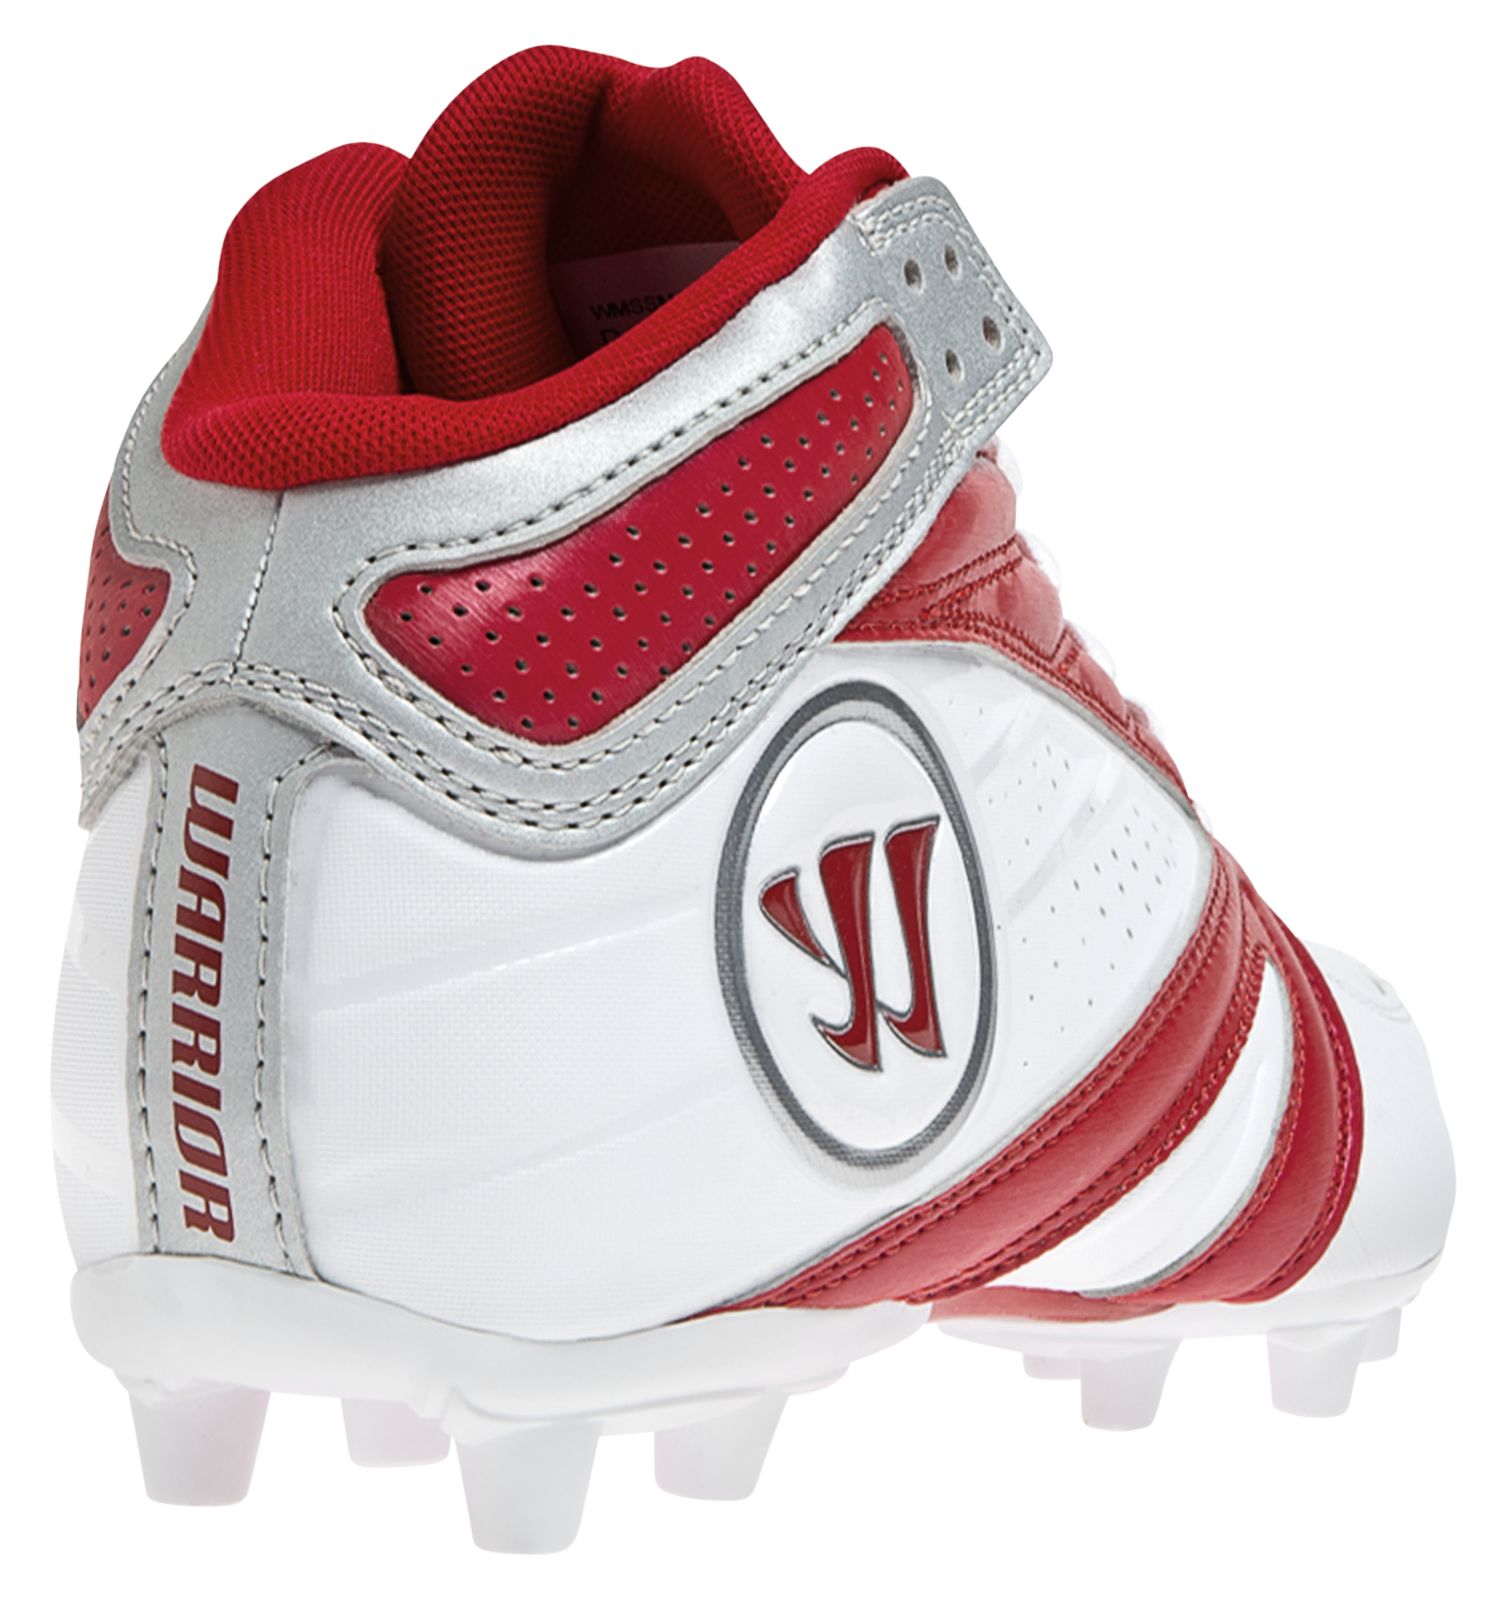 Second Degree 3.0 Cleat, Red image number 2